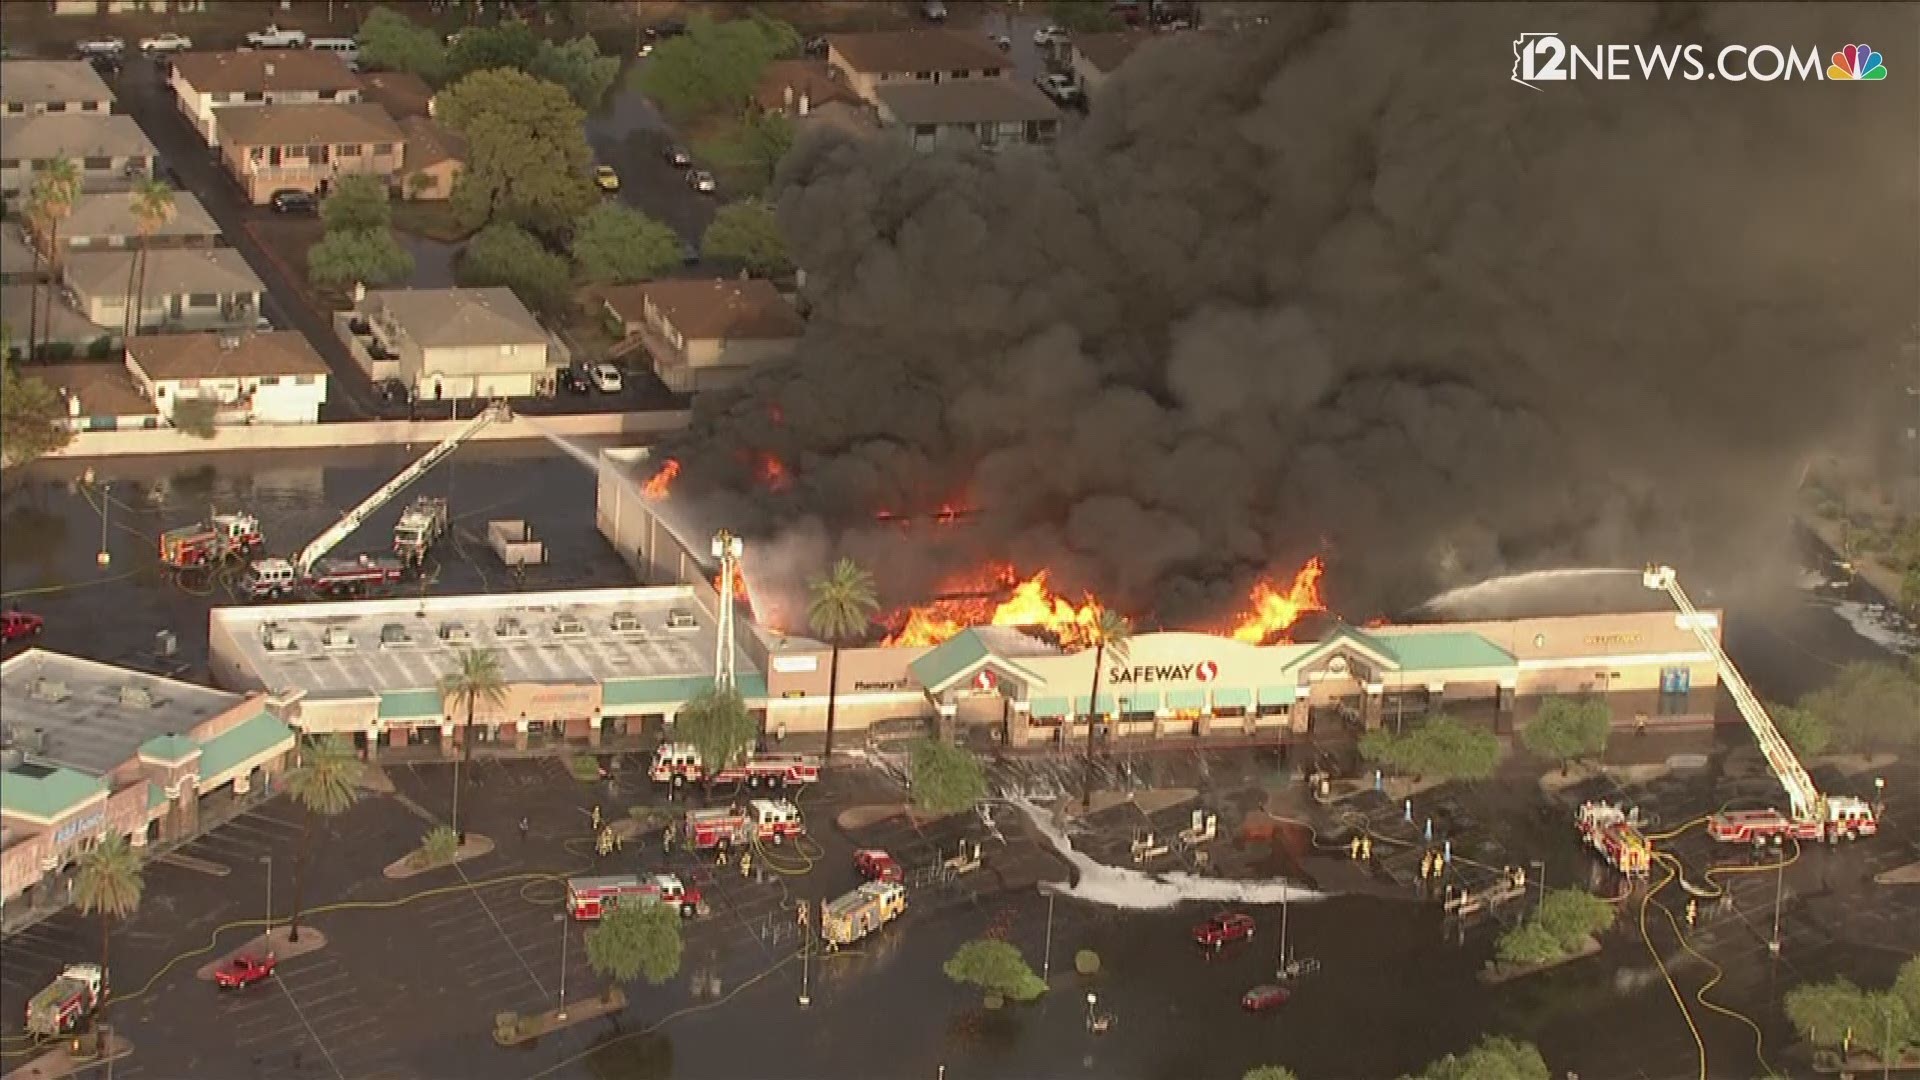 Sky 12 is on the scene of a fire that has engulfed a north Phoenix Safeway. No injuries are reported.